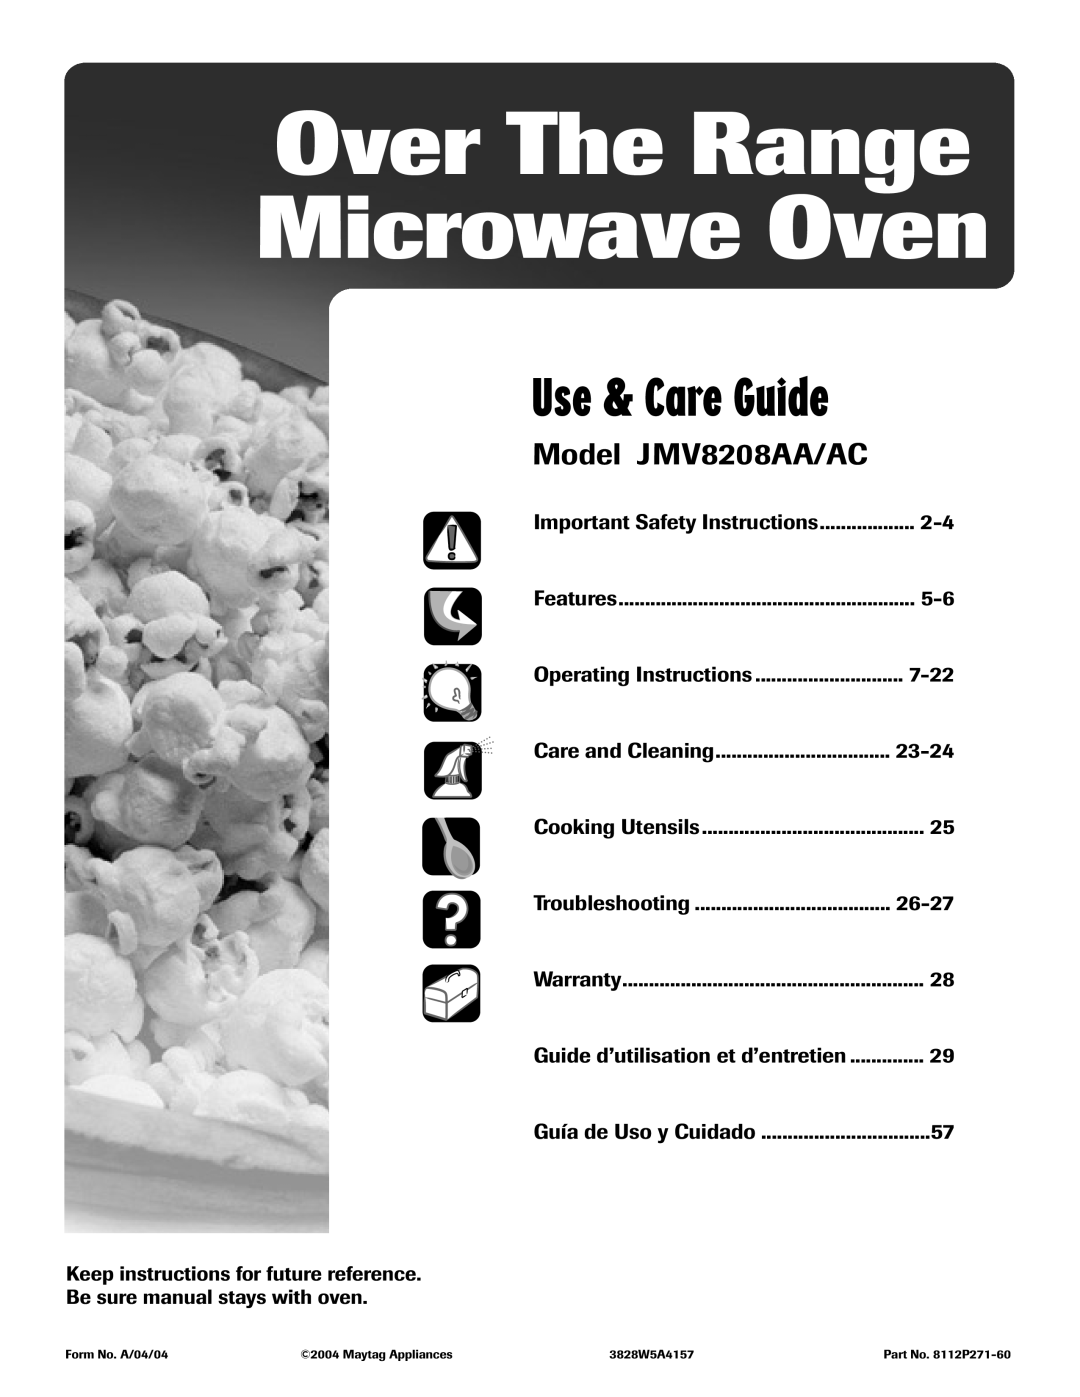 Maytag important safety instructions Over The Range Microwave Oven, Model JMV8208AA/AC, Use & Care Guide 